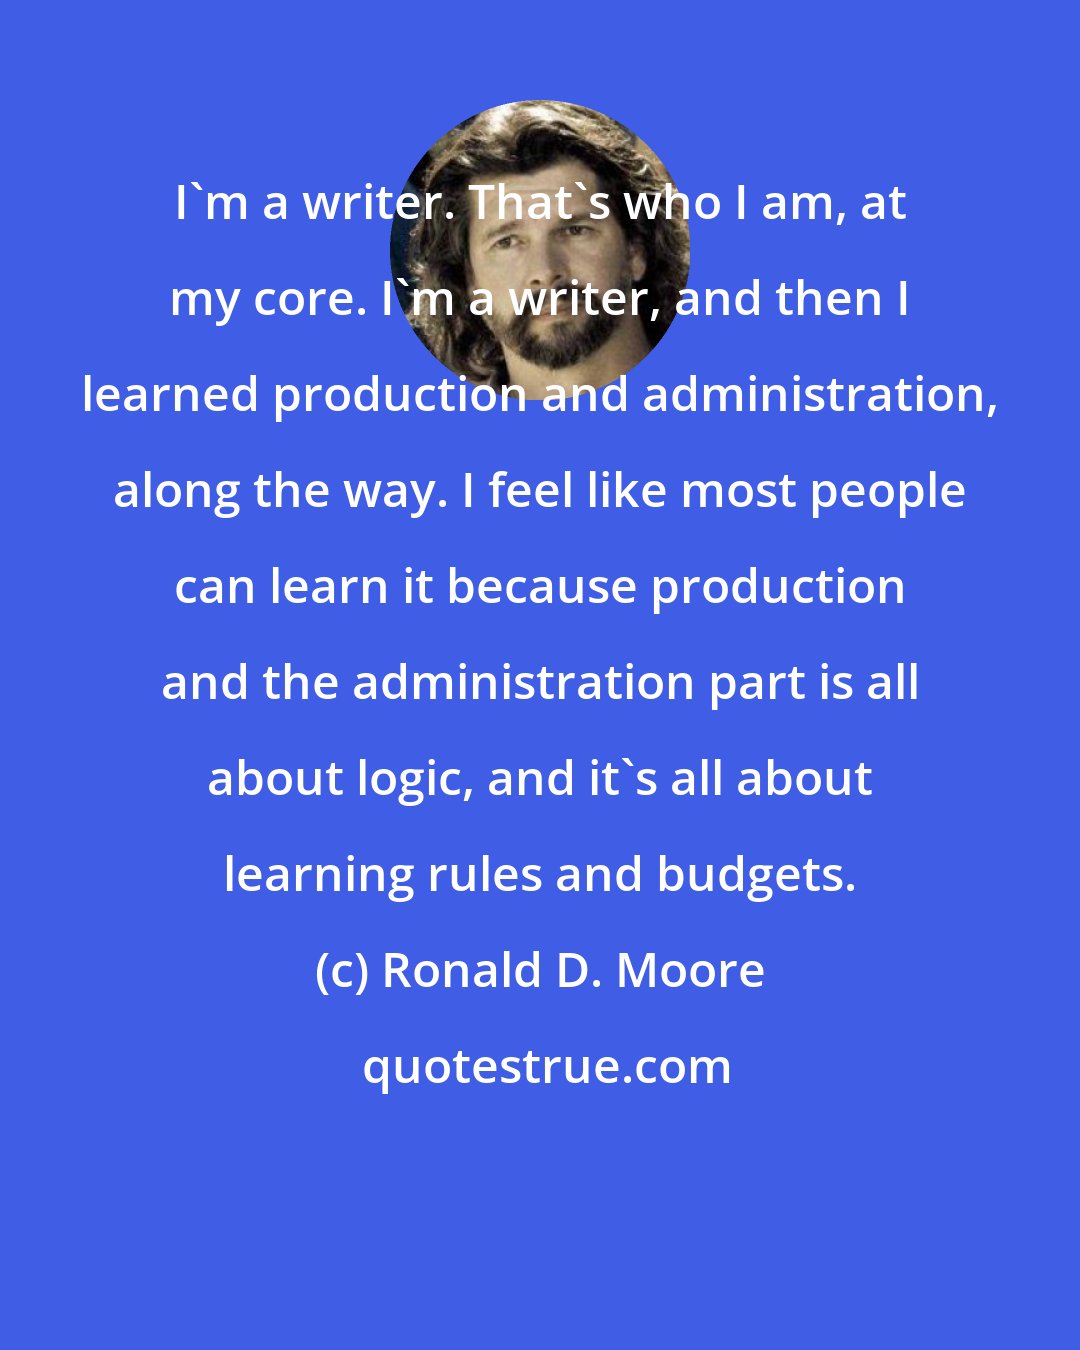 Ronald D. Moore: I'm a writer. That's who I am, at my core. I'm a writer, and then I learned production and administration, along the way. I feel like most people can learn it because production and the administration part is all about logic, and it's all about learning rules and budgets.